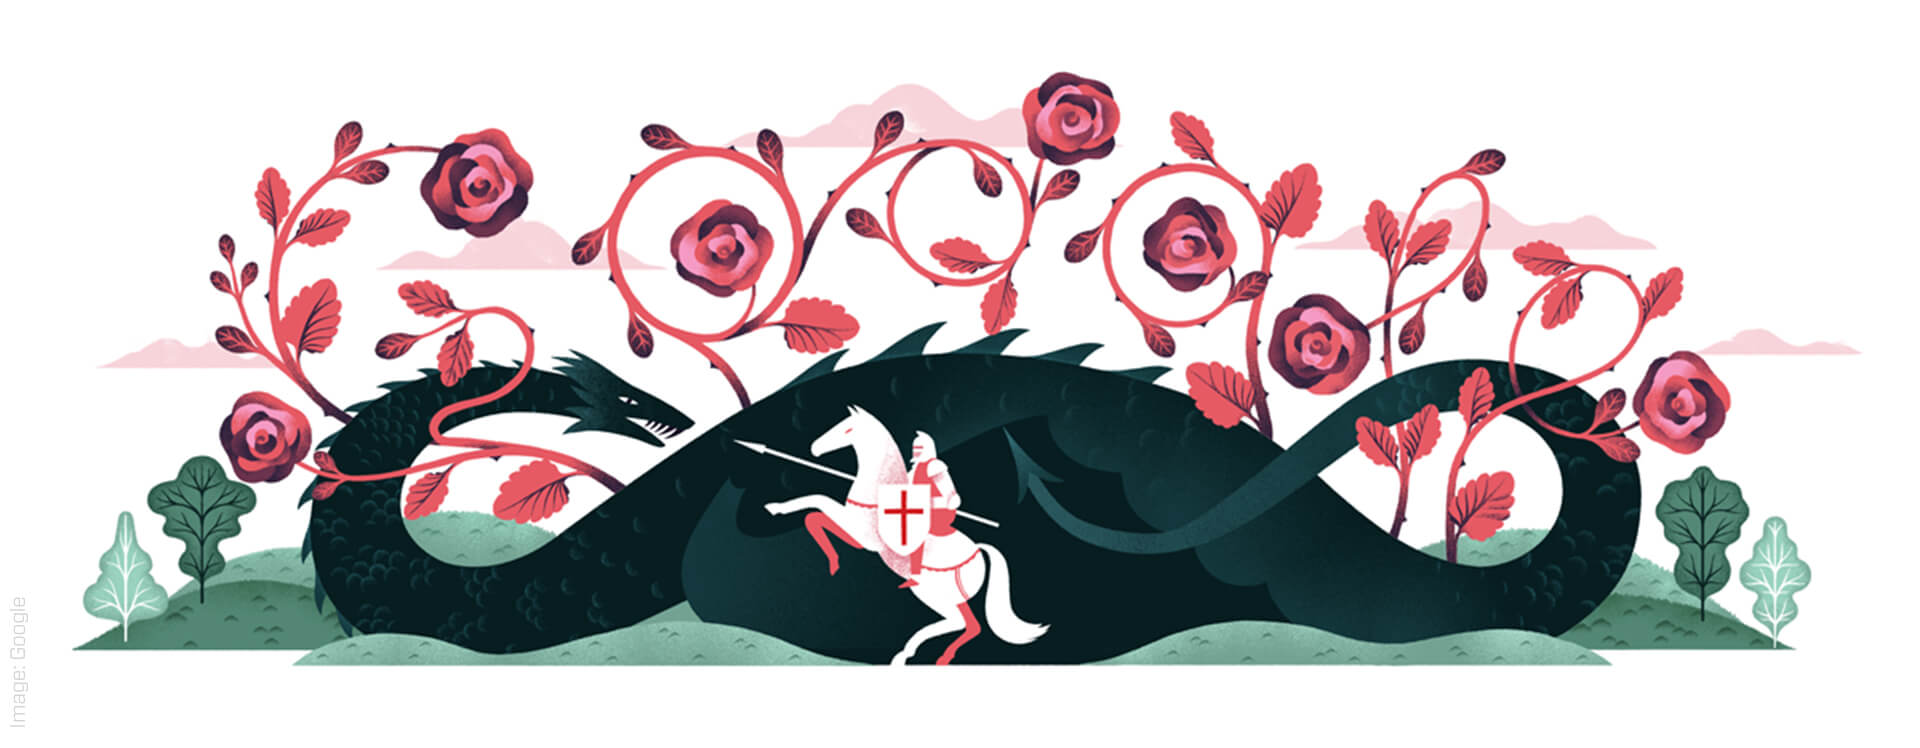 Illustration of a knight fighting a dragon with roses coming out of the dragon